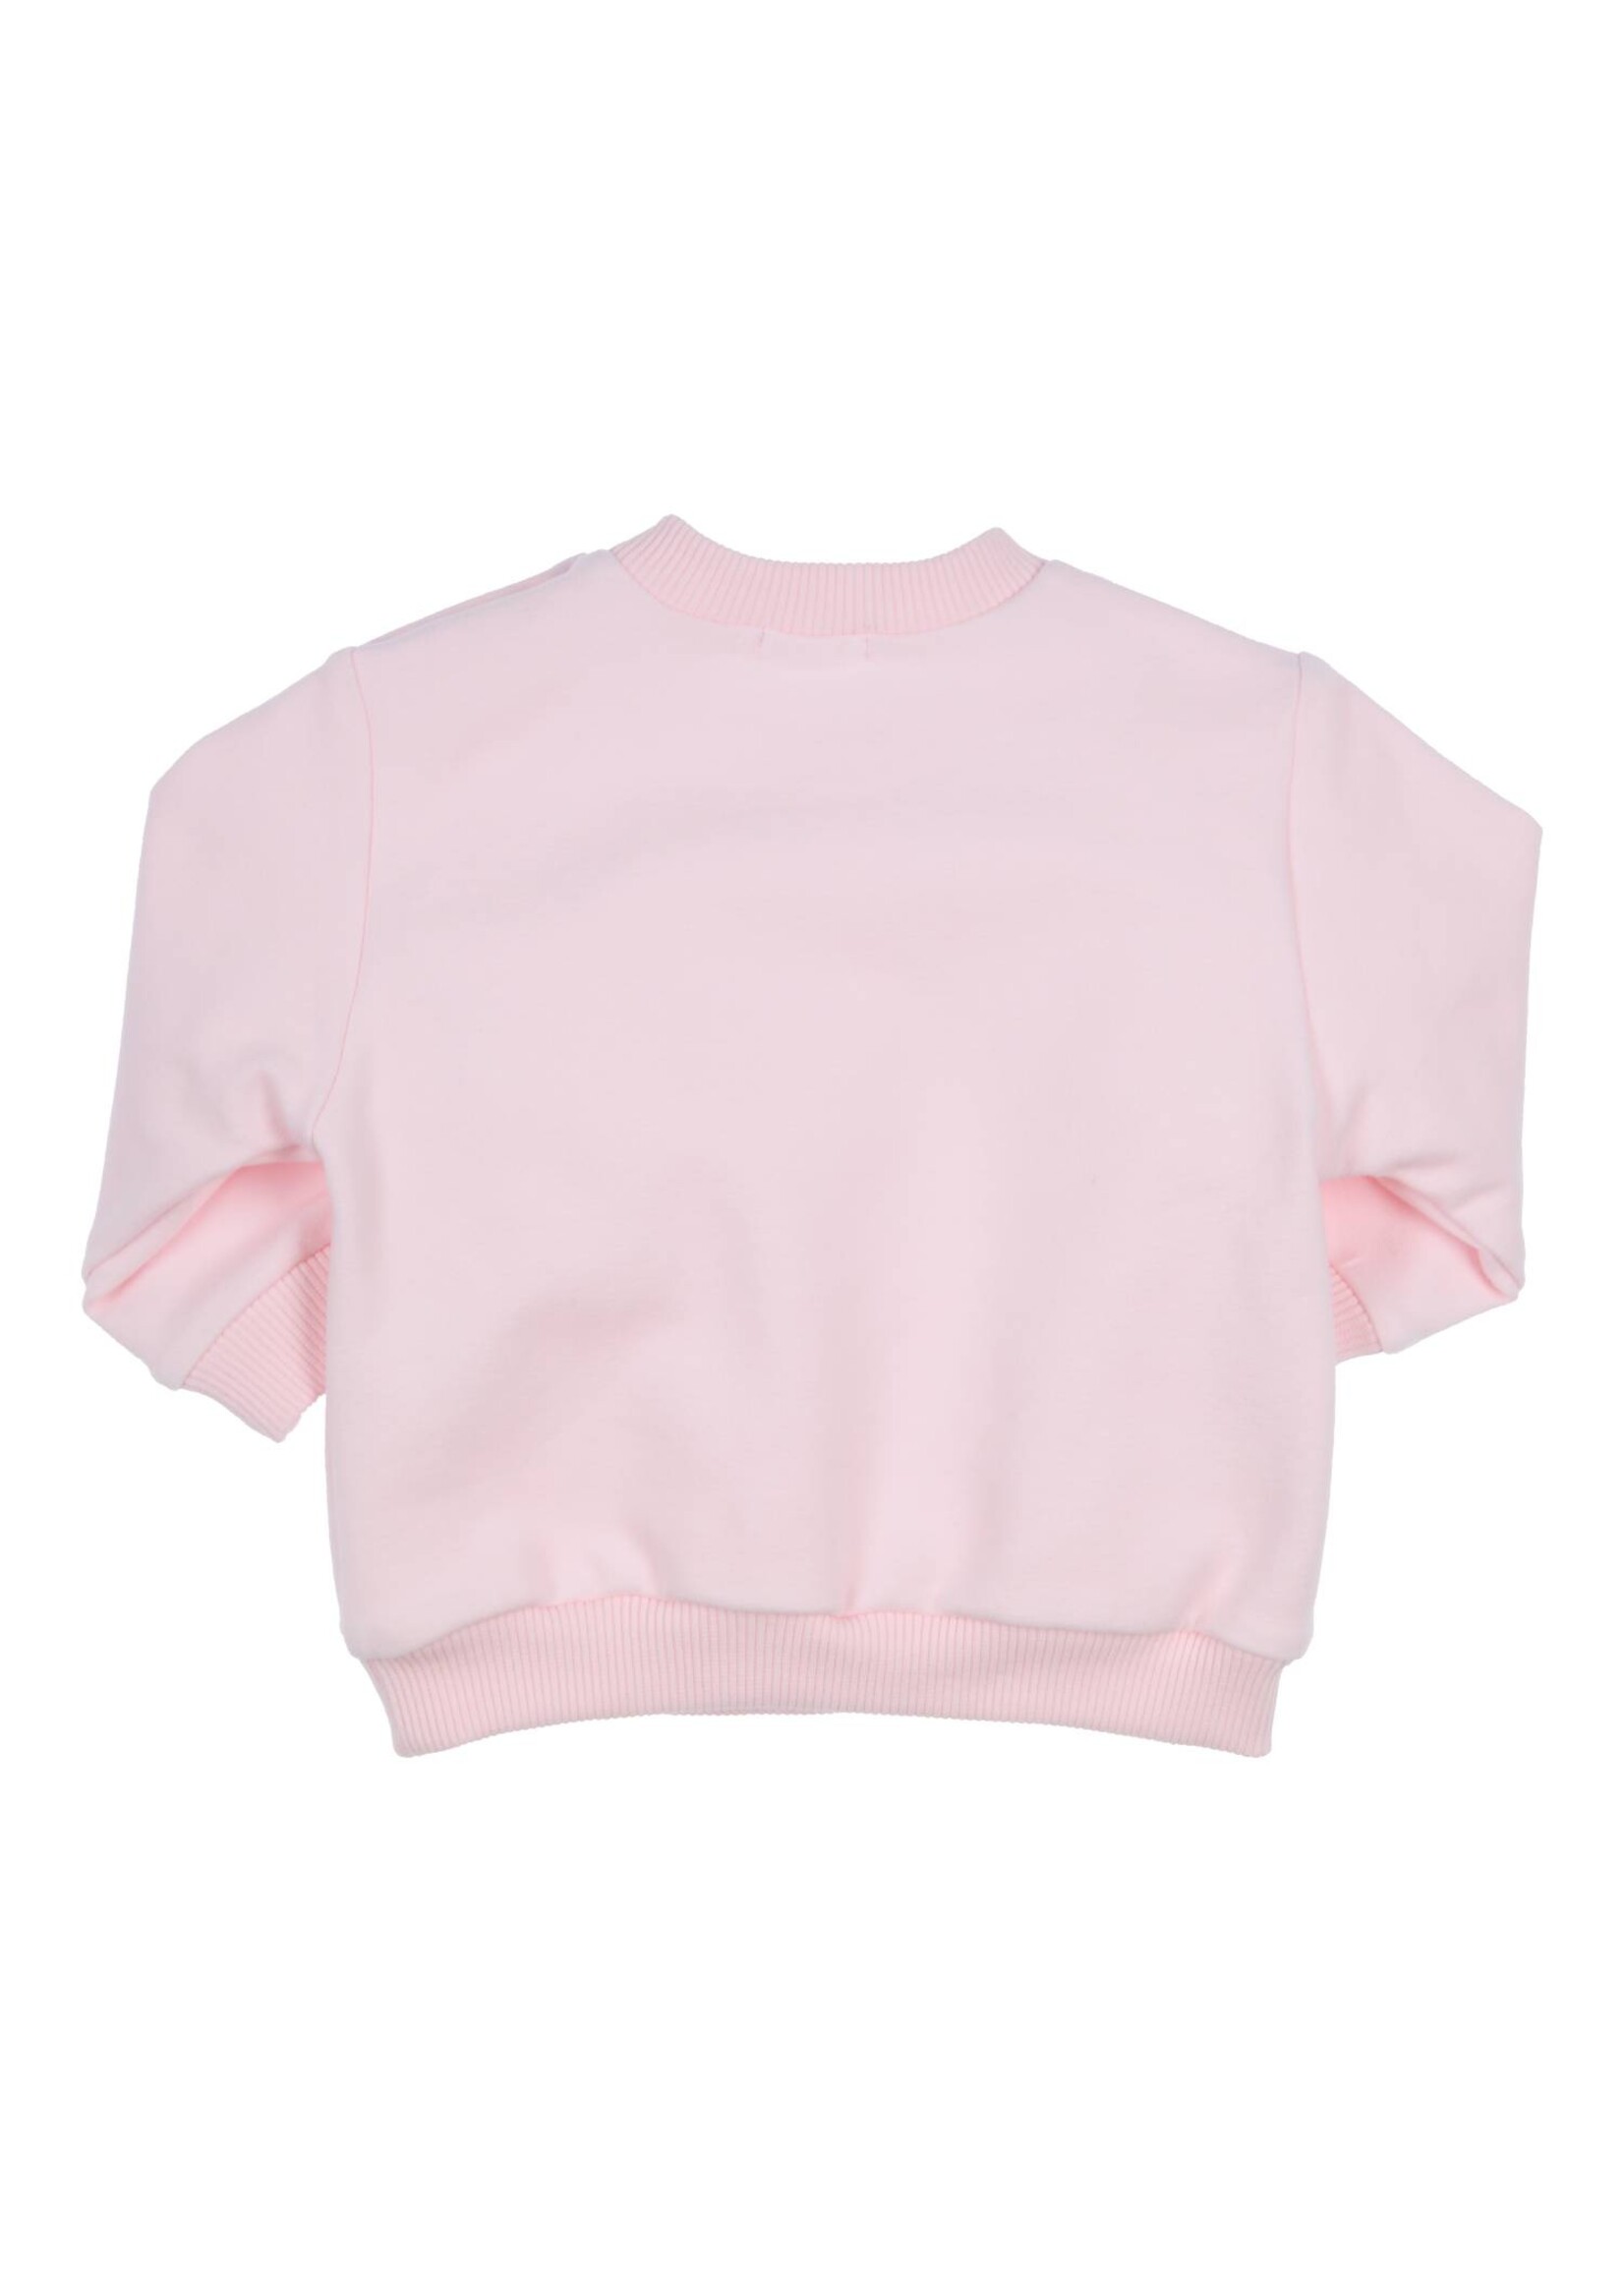 Gymp Girls Sweater Carbon 352-4424-10 Old Rose